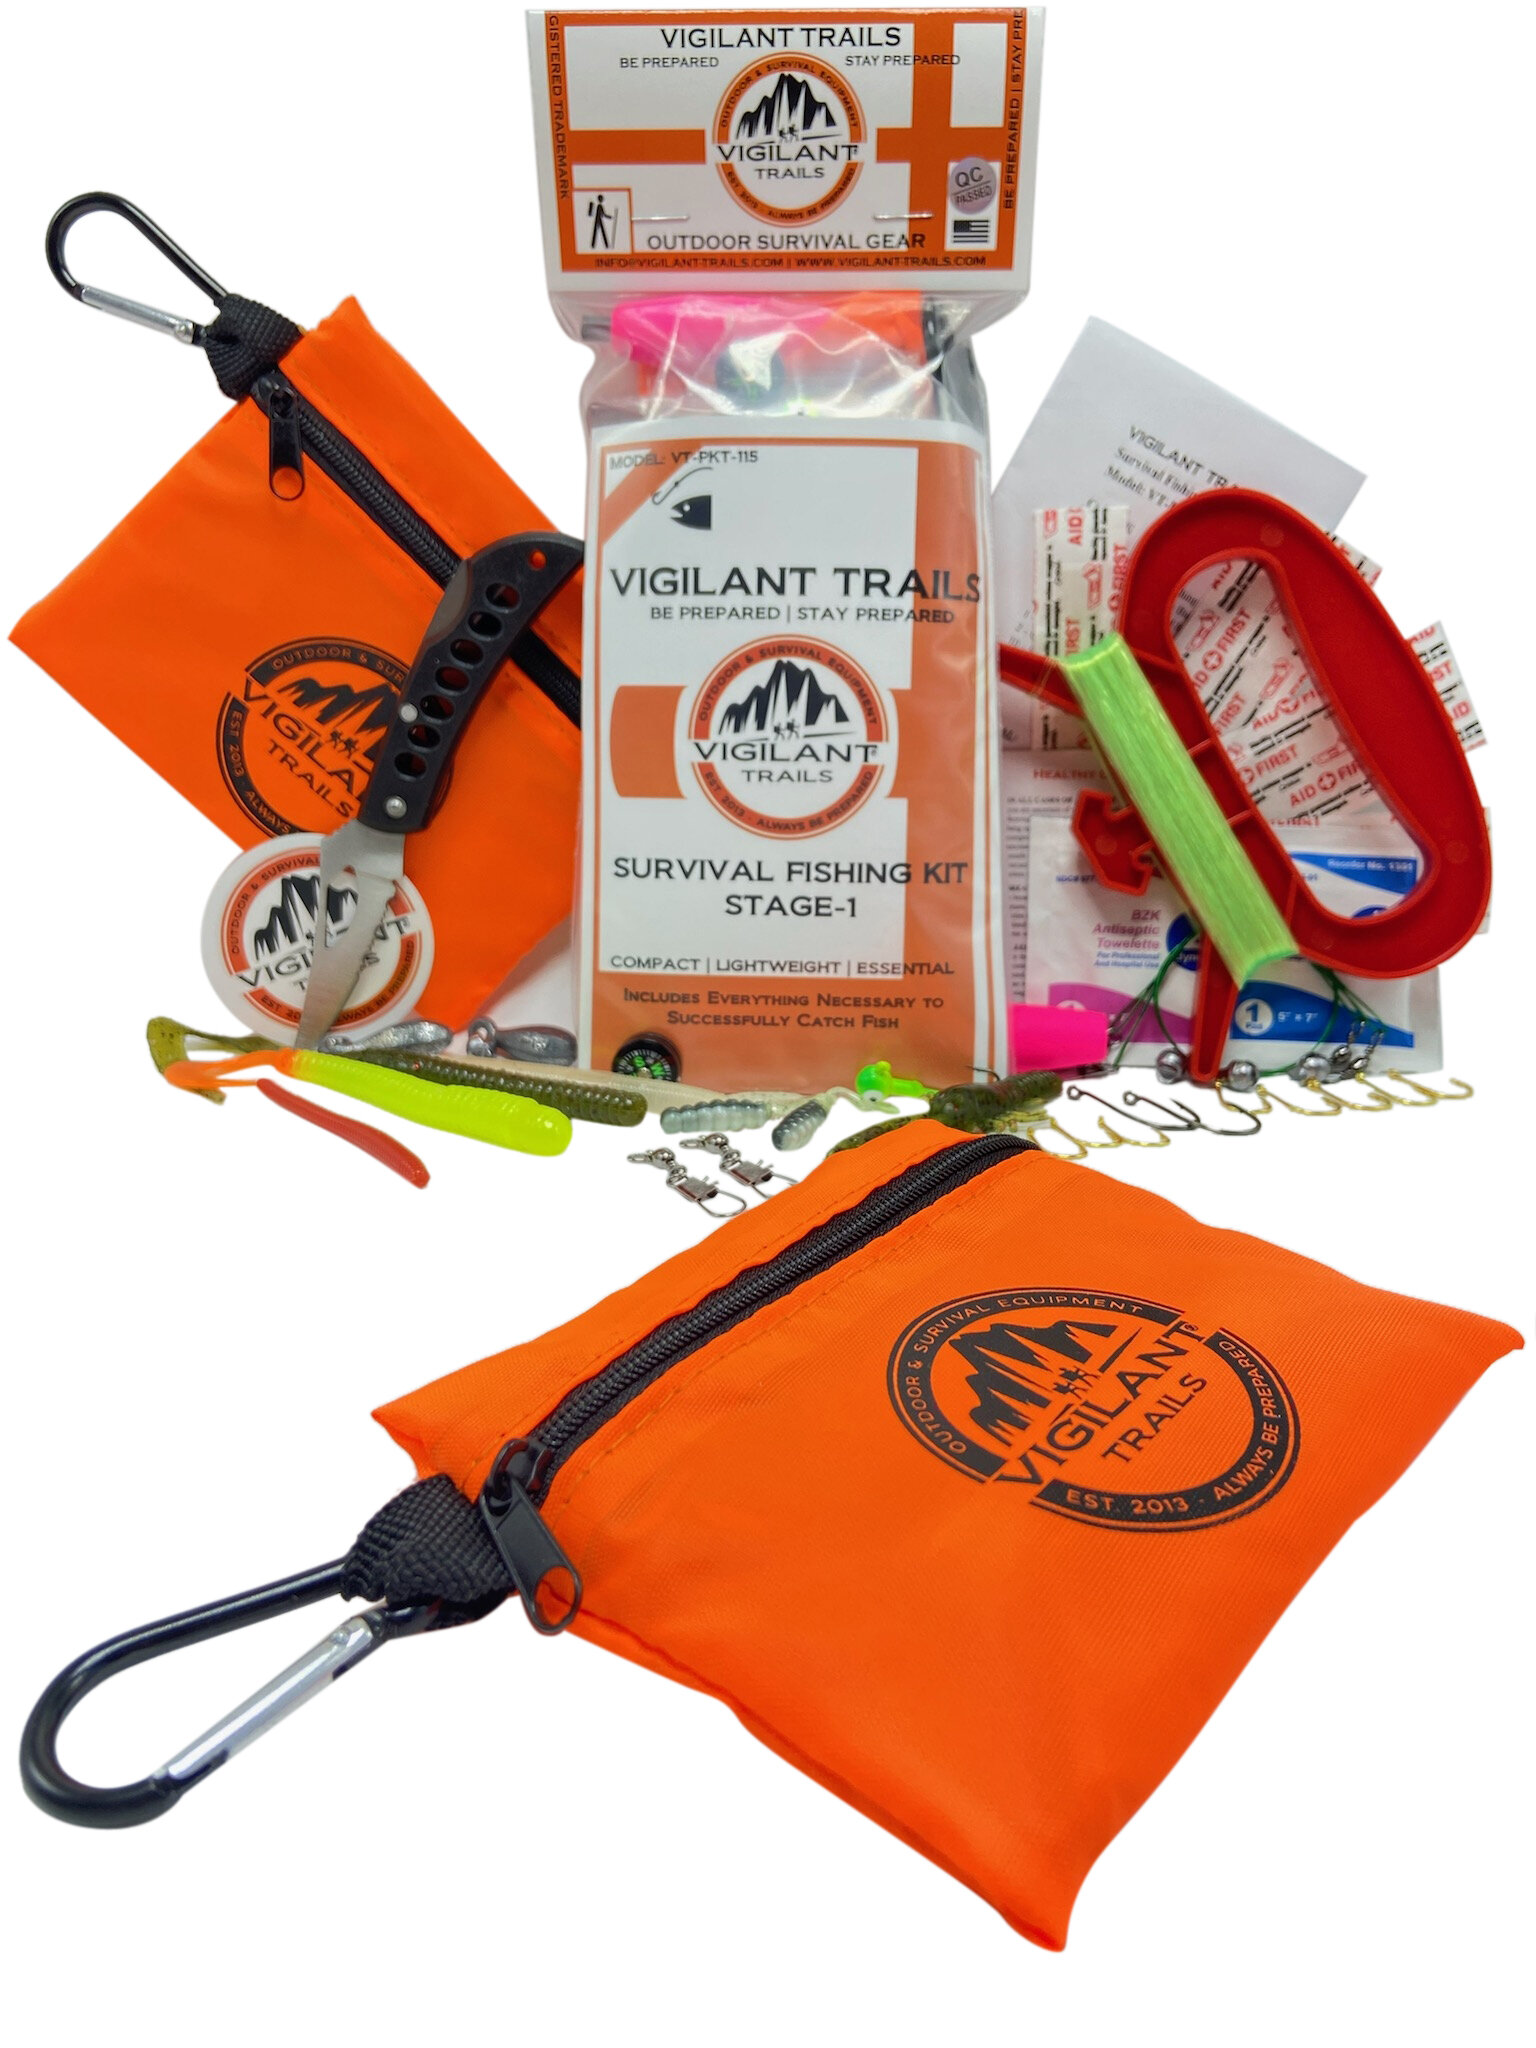 Vigilant Trails Pre-Packed Survival Sewing Kit Stage-2. Includes